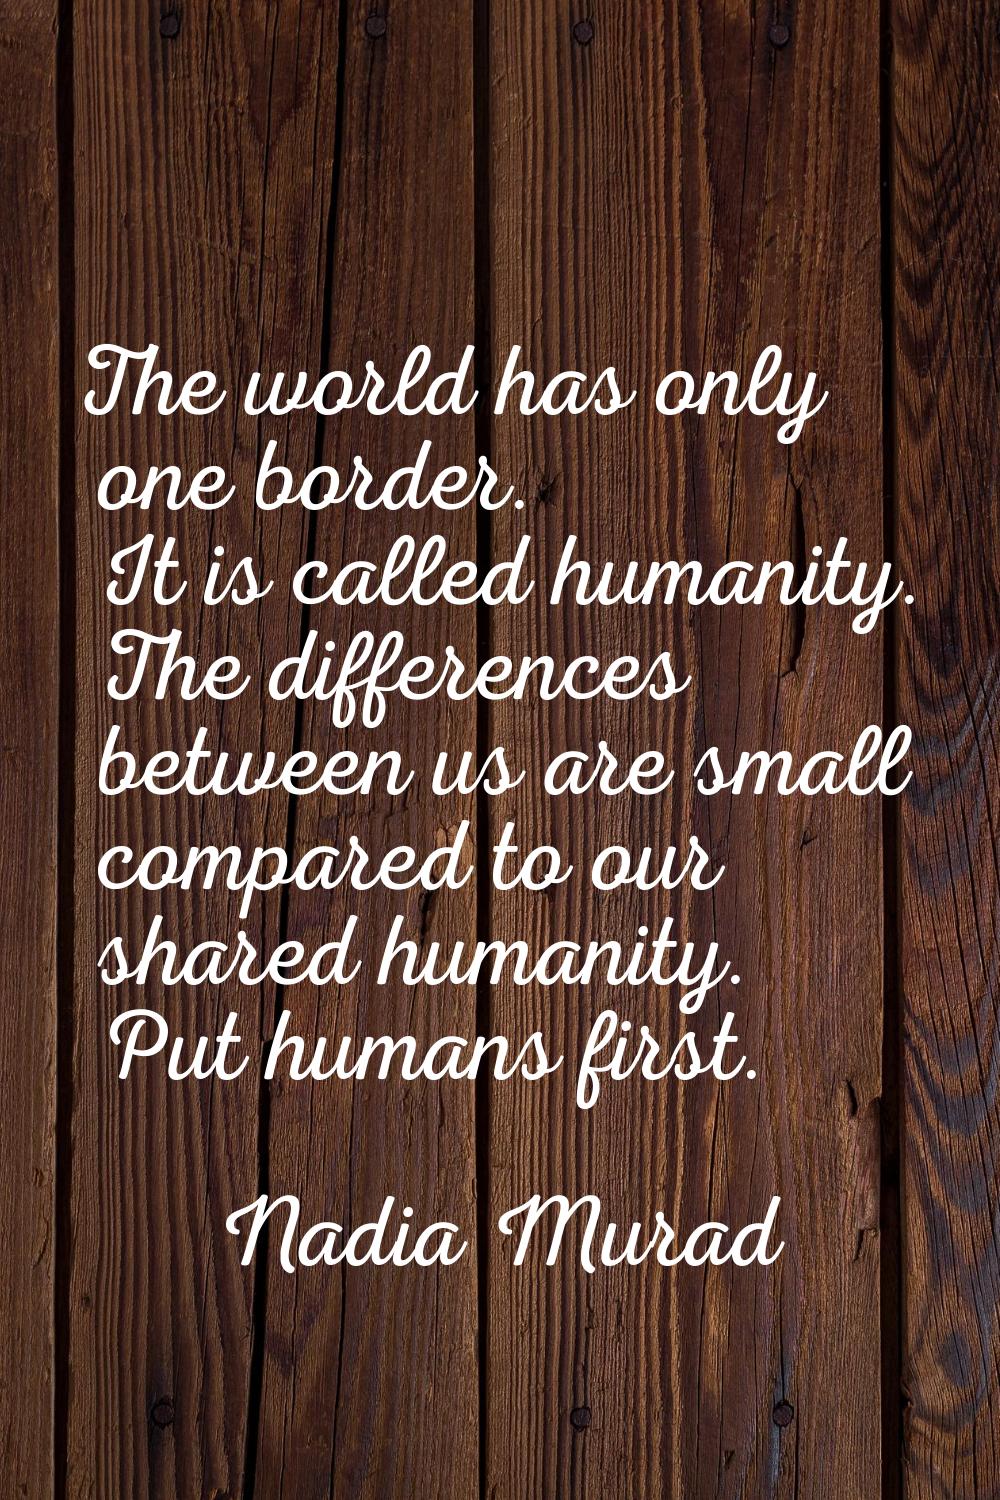 The world has only one border. It is called humanity. The differences between us are small compared